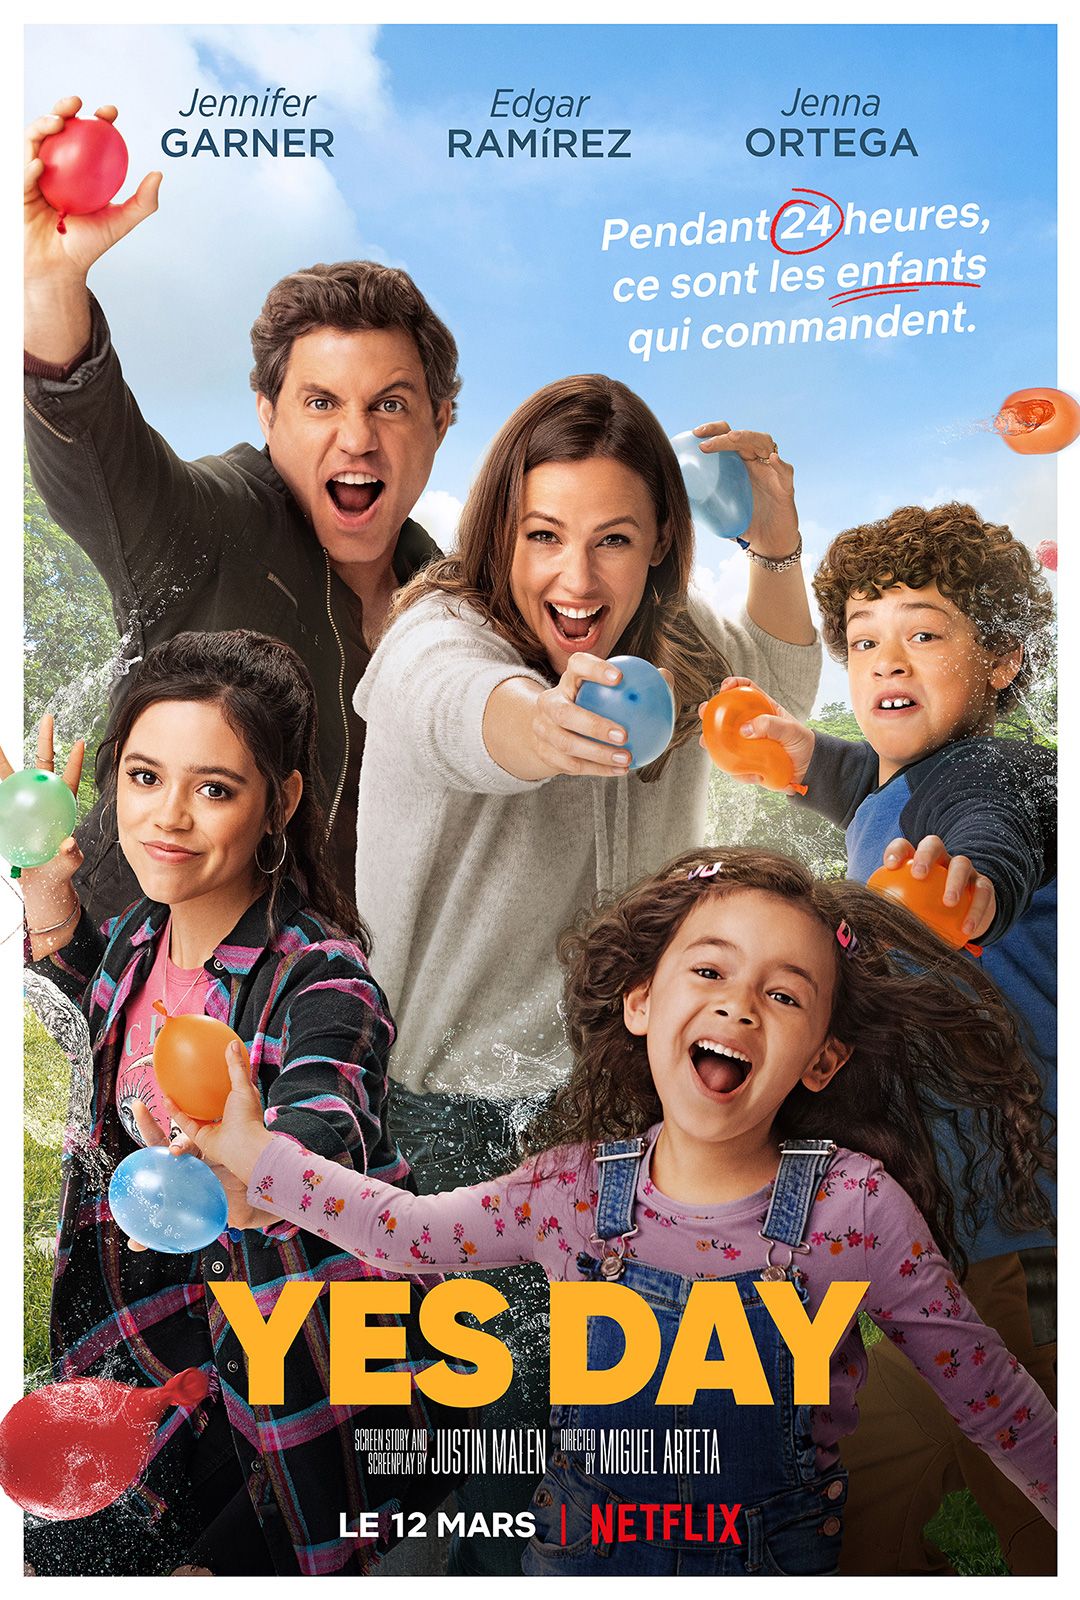 Yes Day streaming vf gratuit